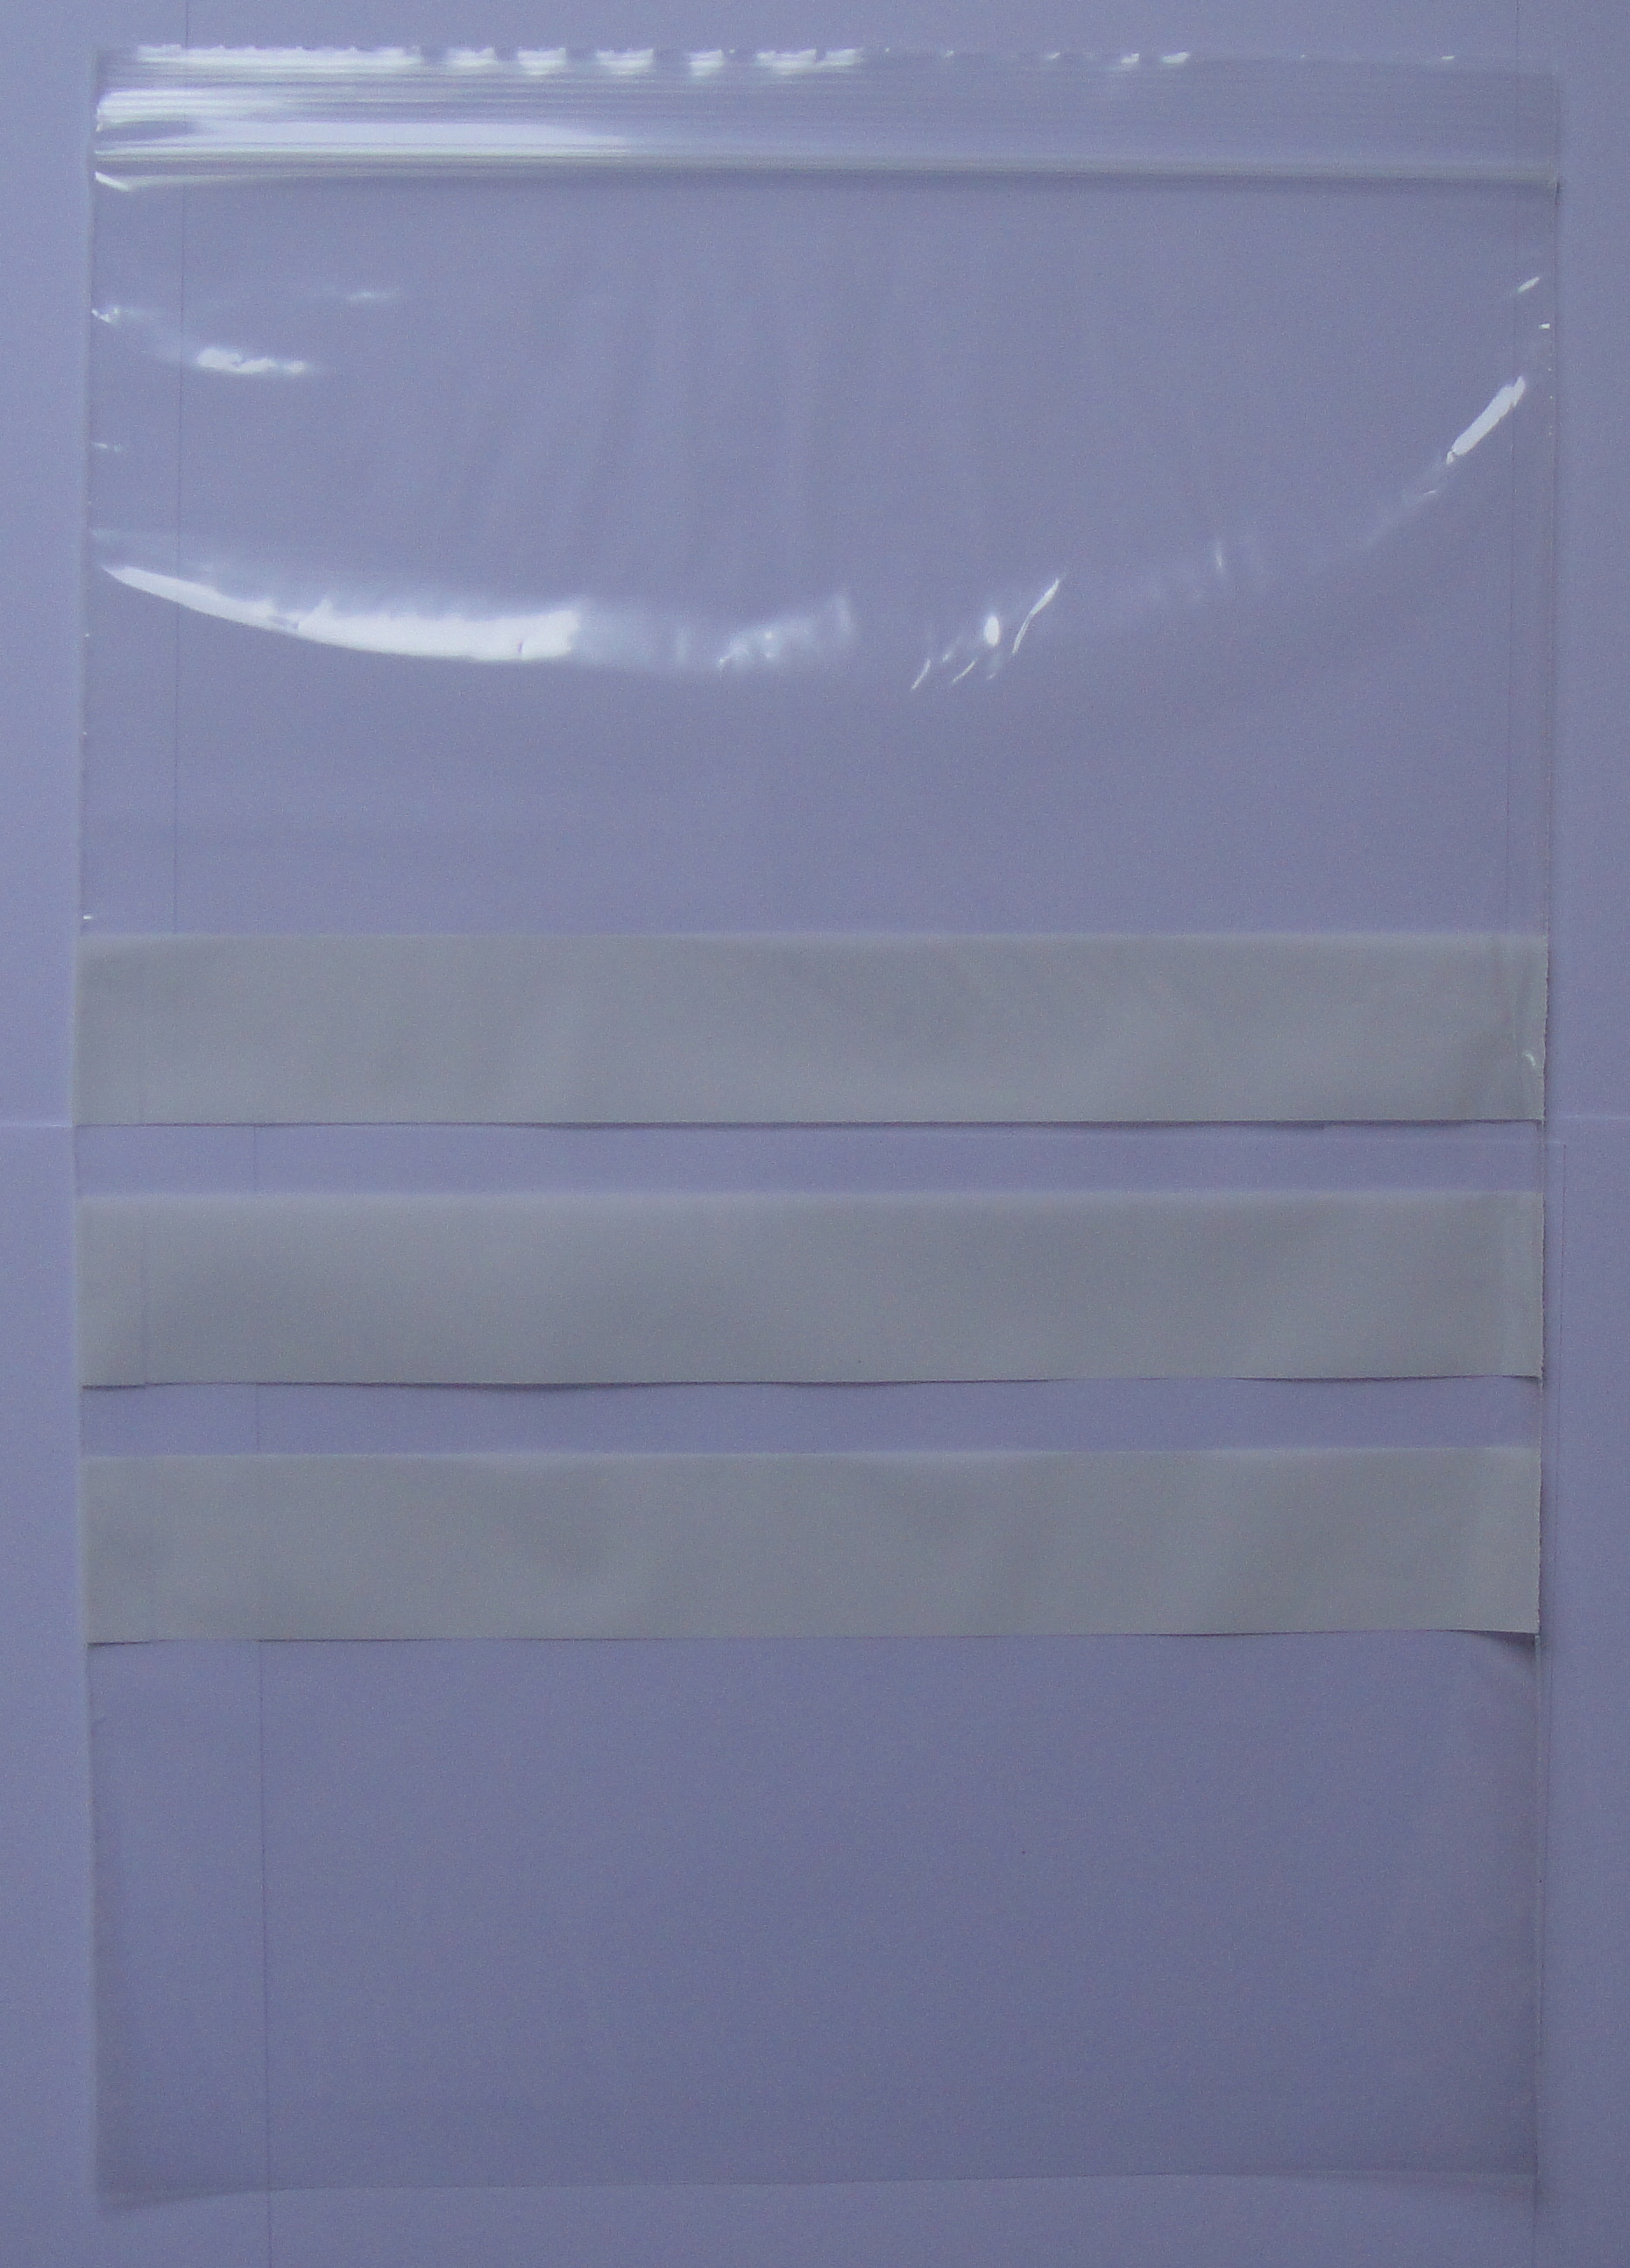 Grip Seal Bags 5,000 x 5.5" x 5.5" WRITE ON WHITE PANEL Zip Resealable Poly Bags 